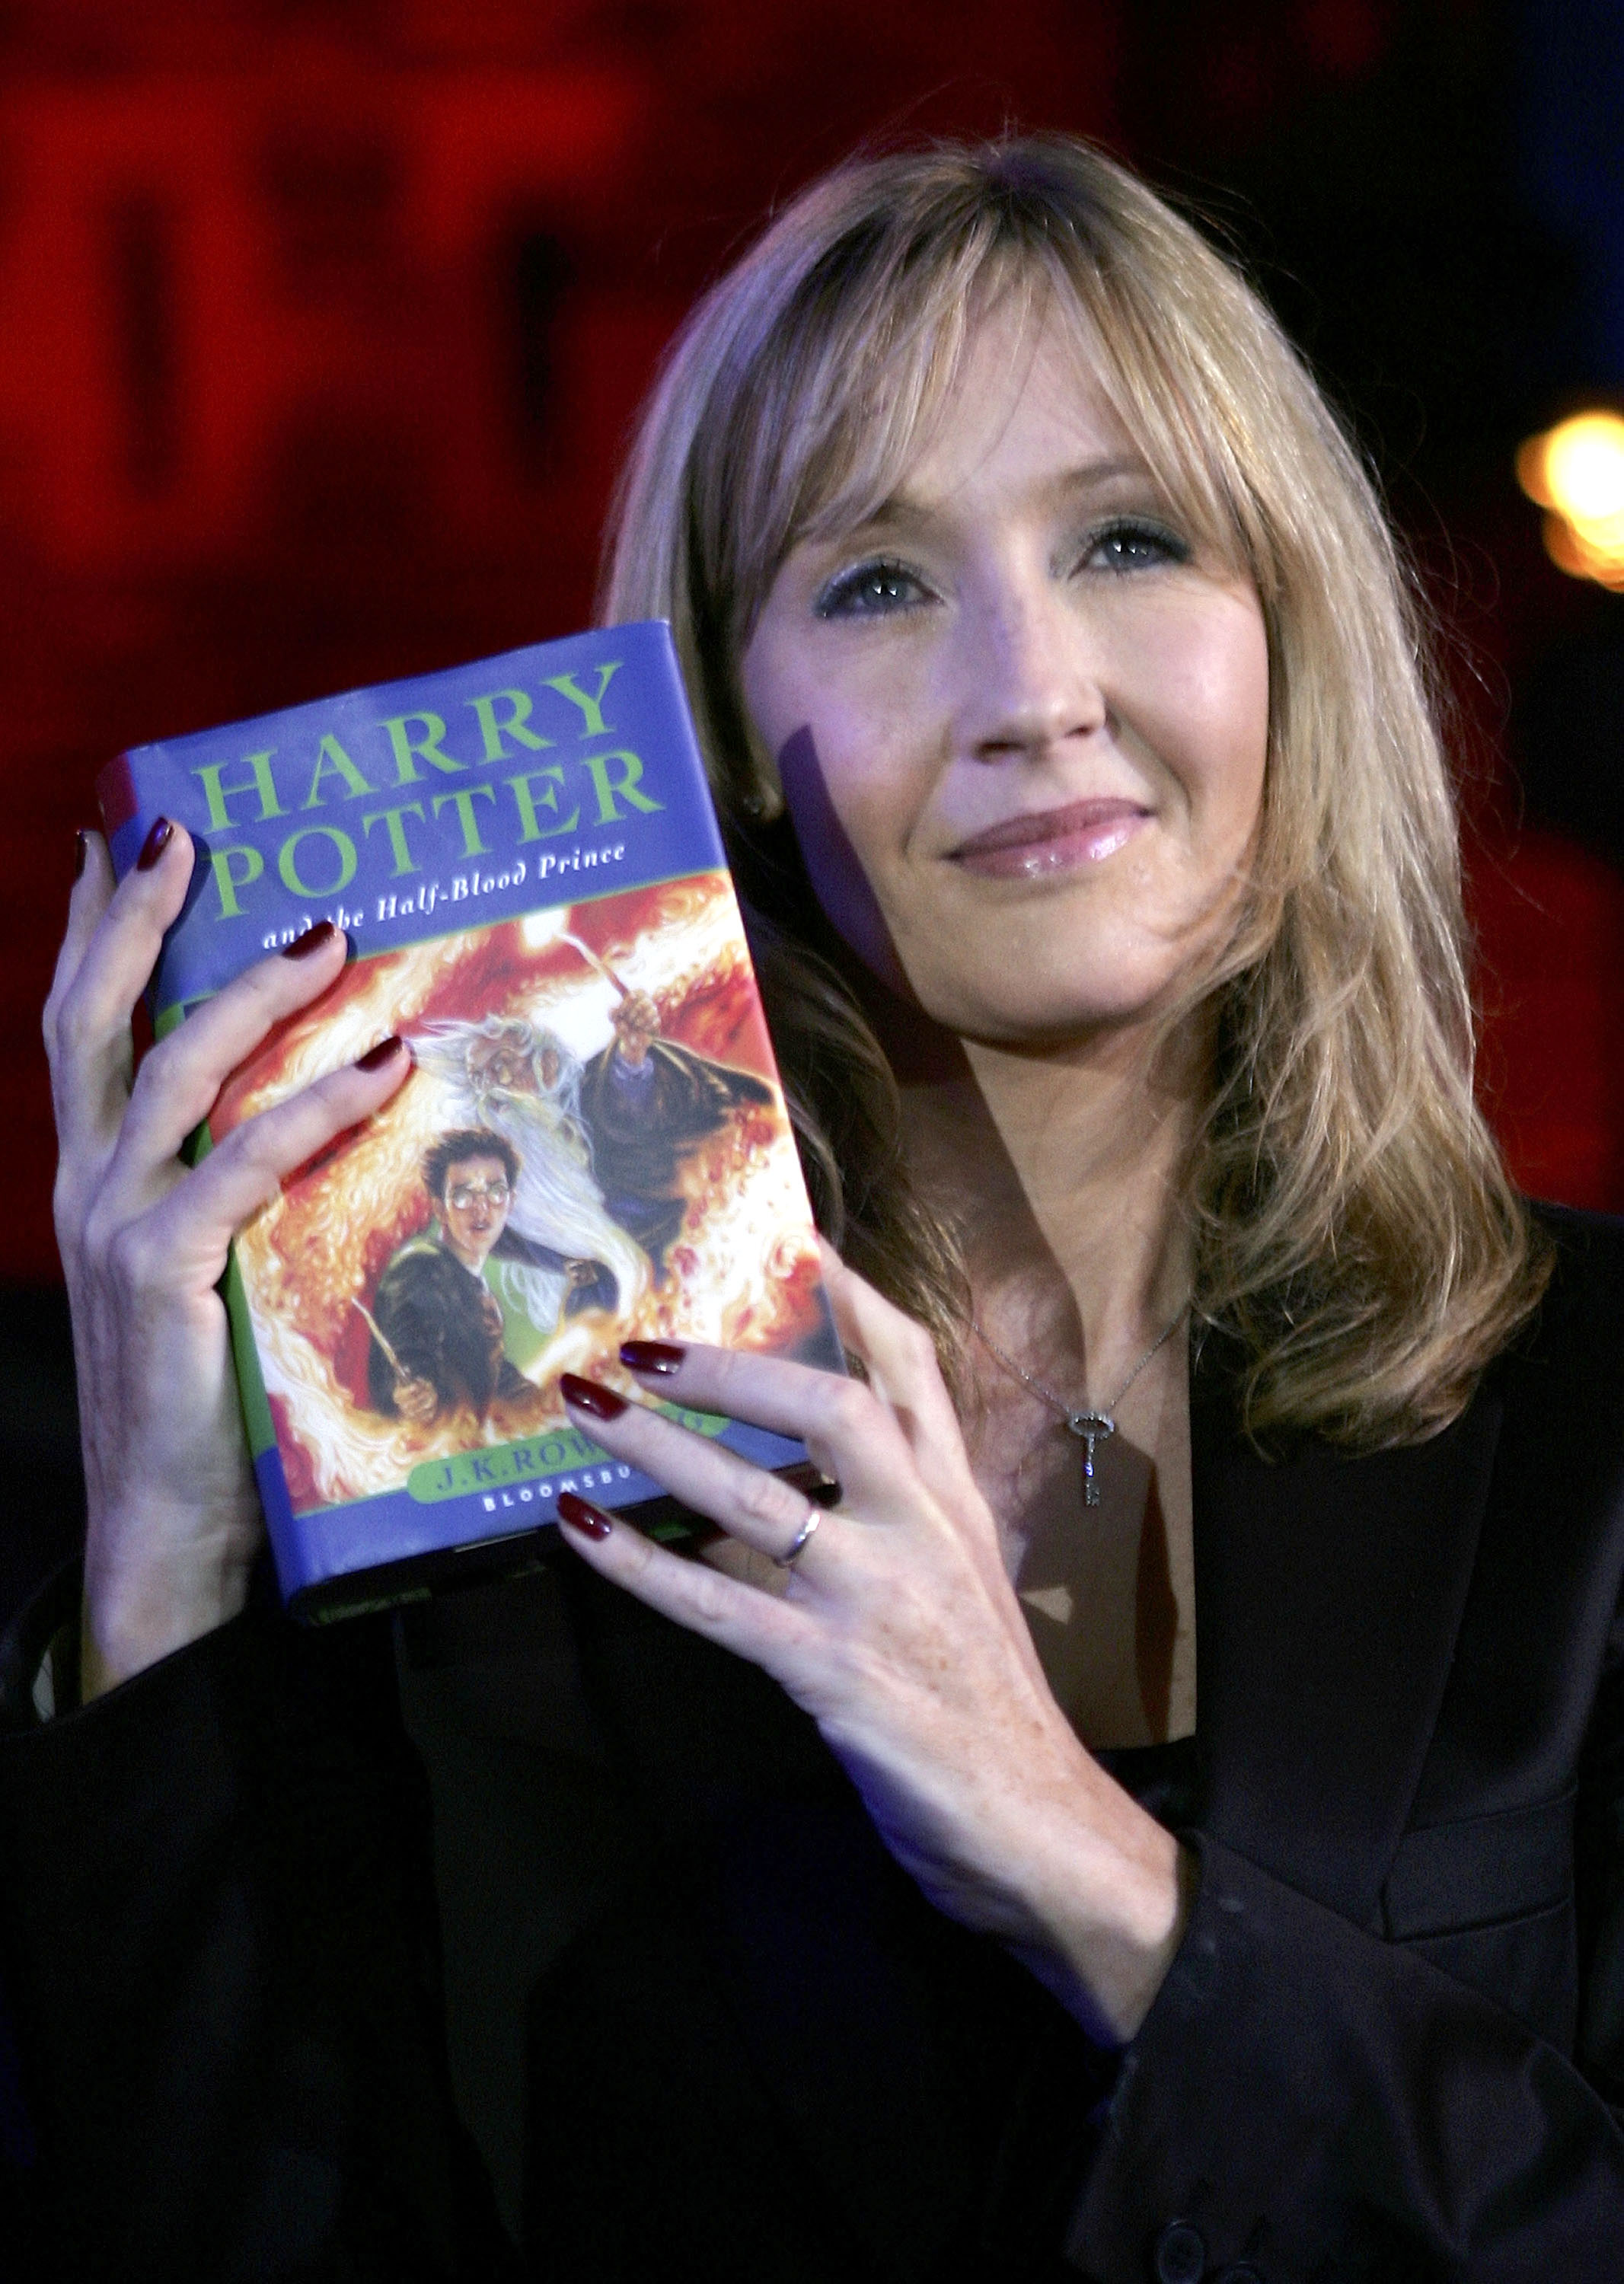 Harry Potter author JK Rowling arrives at Edinburgh Castle where she will read passages from the sixth magical children's title "Harry Potter And The Half-Blood Prince," on July 15, 2005 in Edinburgh, Scotland. | Source: Getty Images